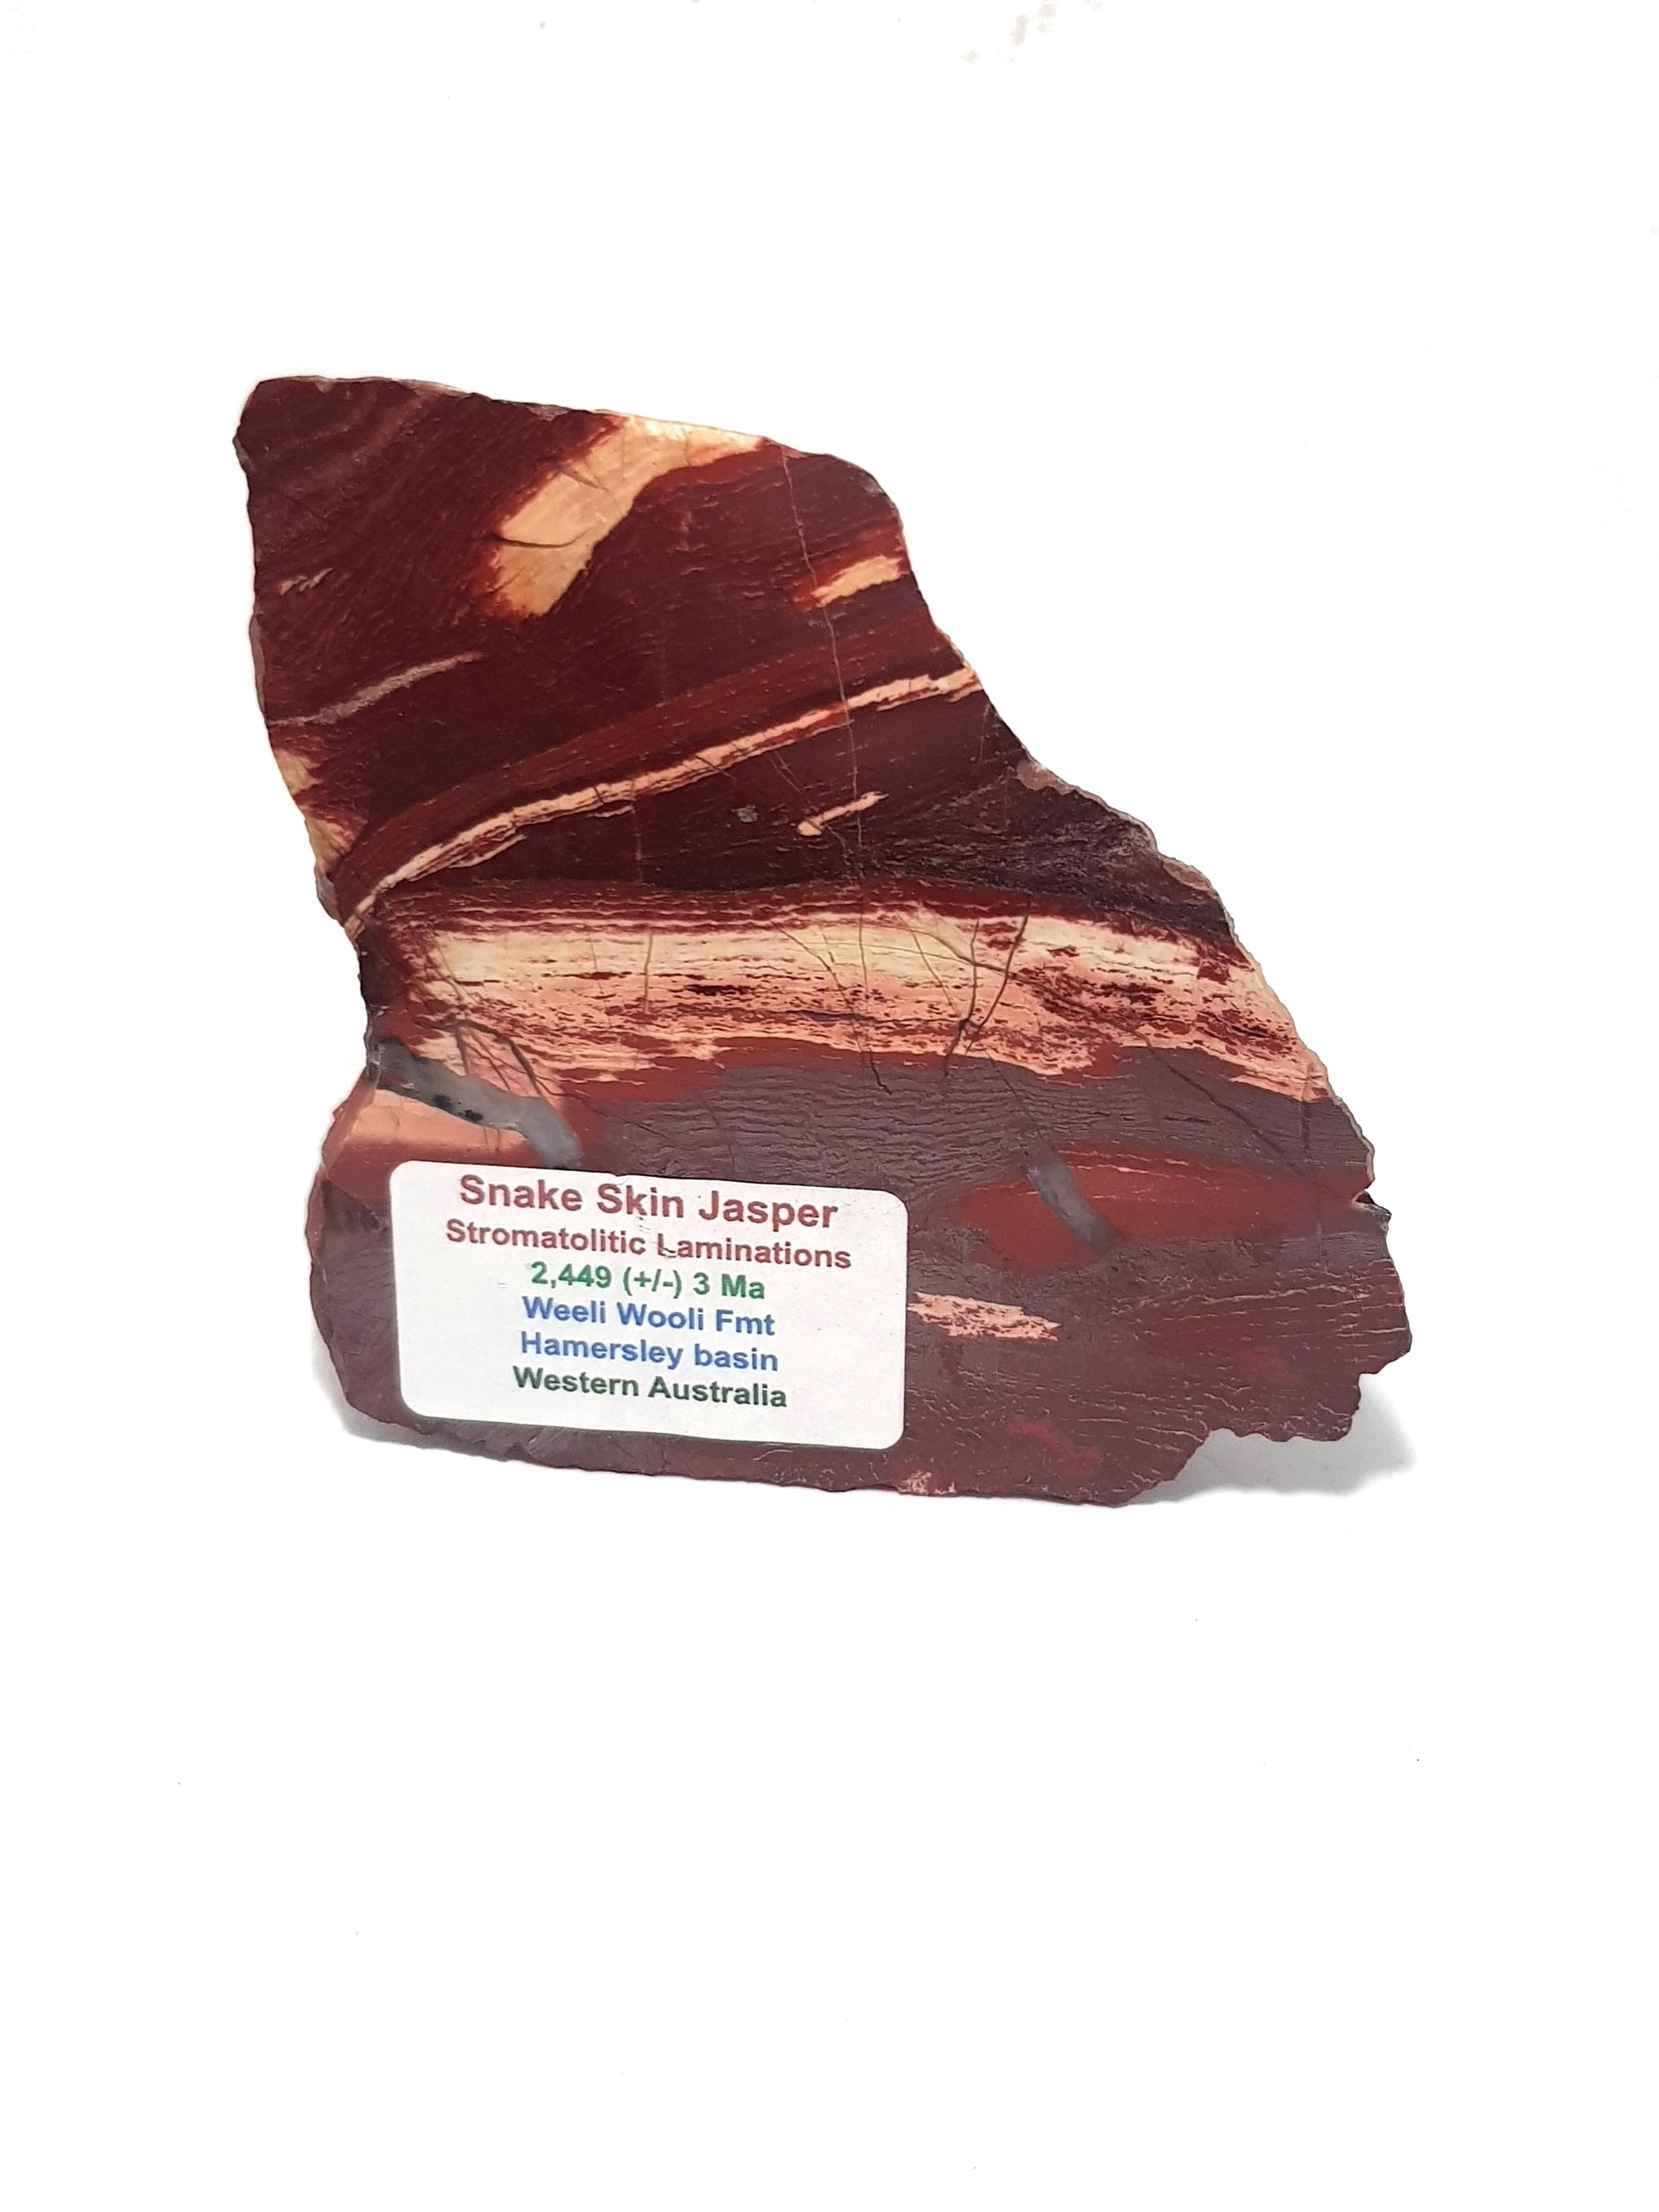 A slice of snake skin jasper. This is a predominately reddish brown material with thin bands of light pink. The bands are parallel at the bottom of the same, but cut at a 30 degree angle in the top half of the slice. The sample also has a printed label giving product information. This label is replicated in the digital entry for the sample. Snake skin jasper -- Science of magic